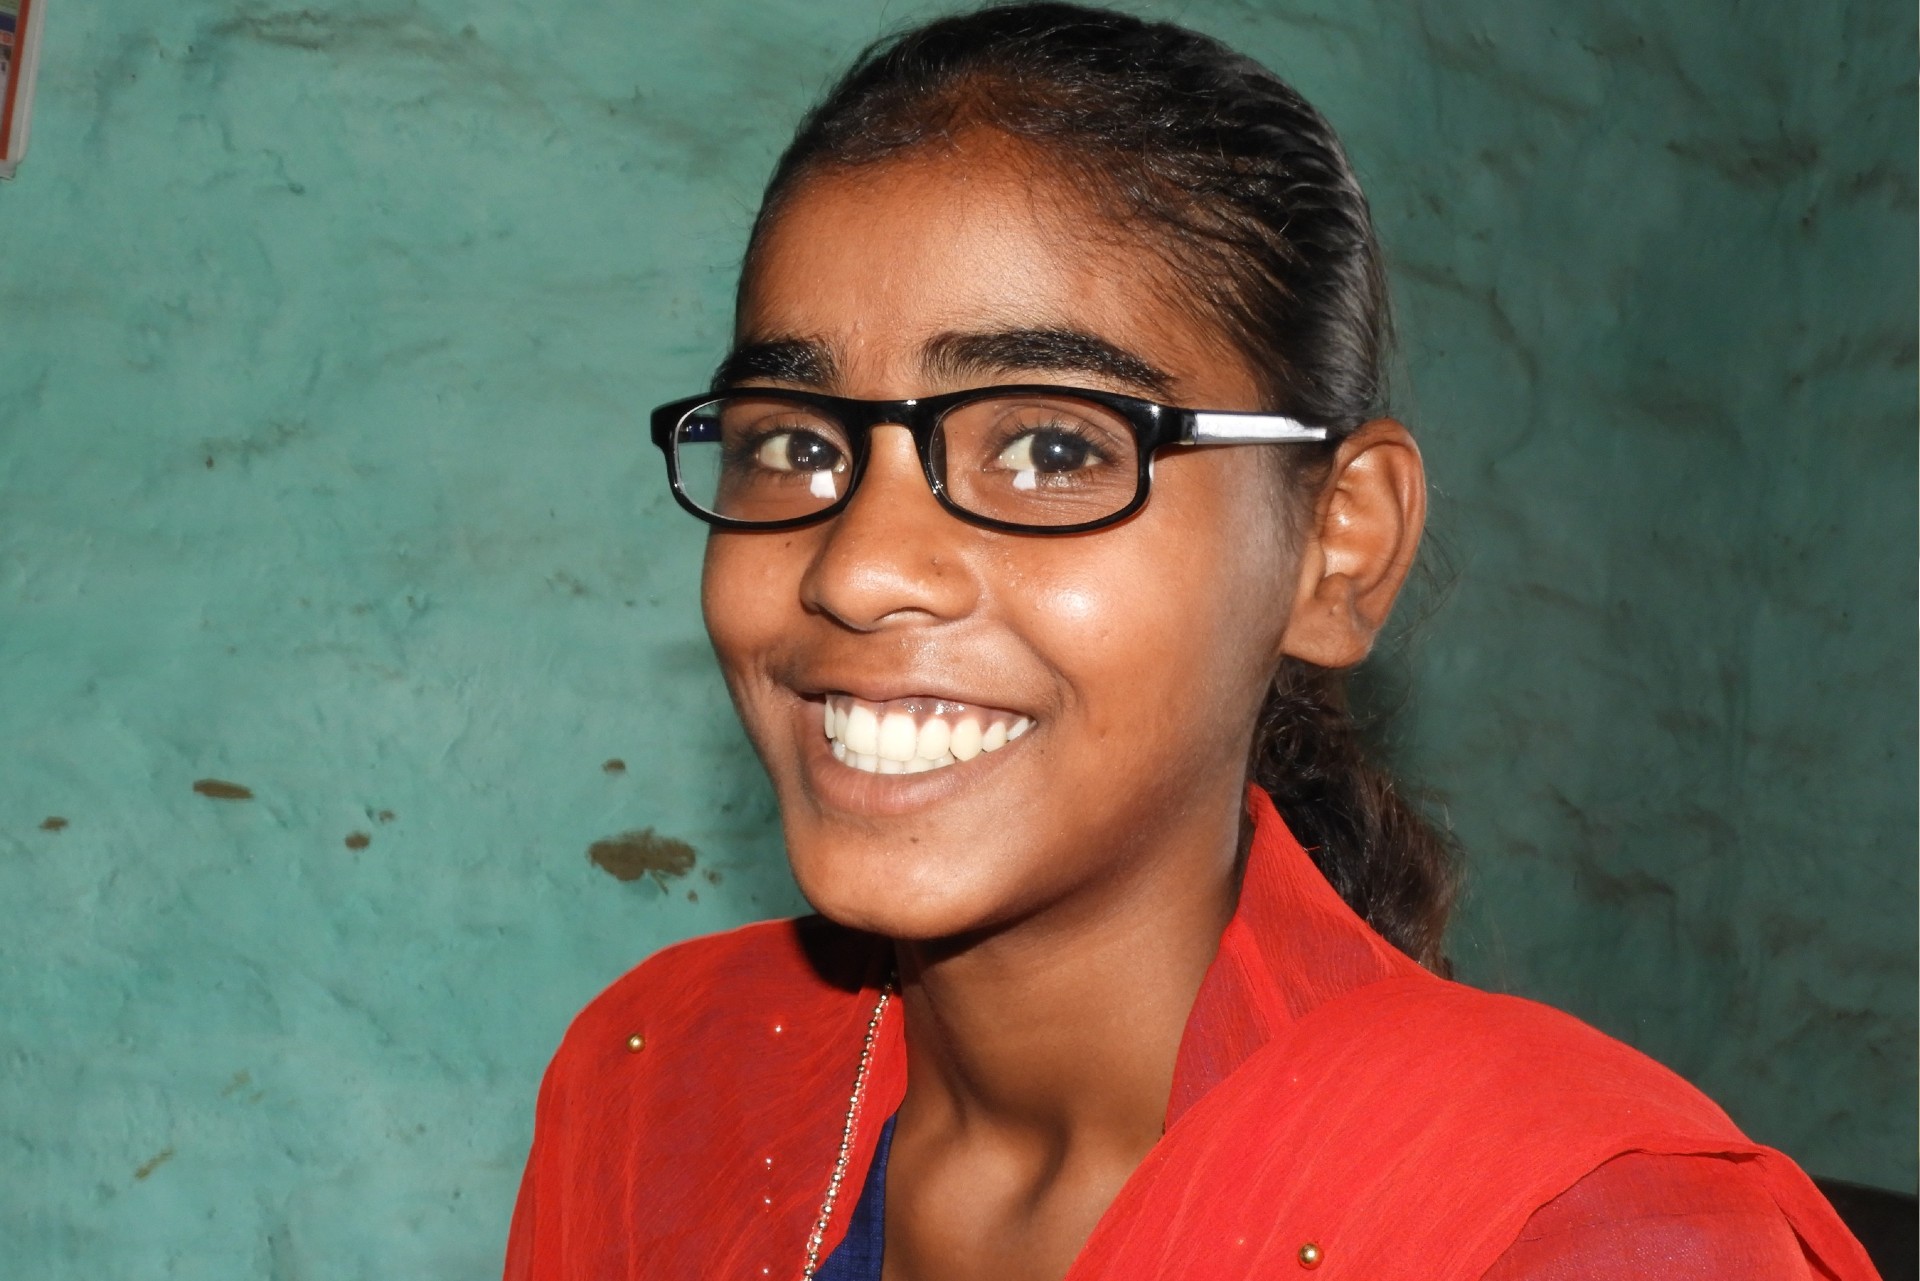 Khushi got an eye exam and new pair of glasses on an Orbis Vision Van in India. She no longer suffers from headaches and blurry vision and wants to join the police academy. Photo: Geoff Oliver Bugbee